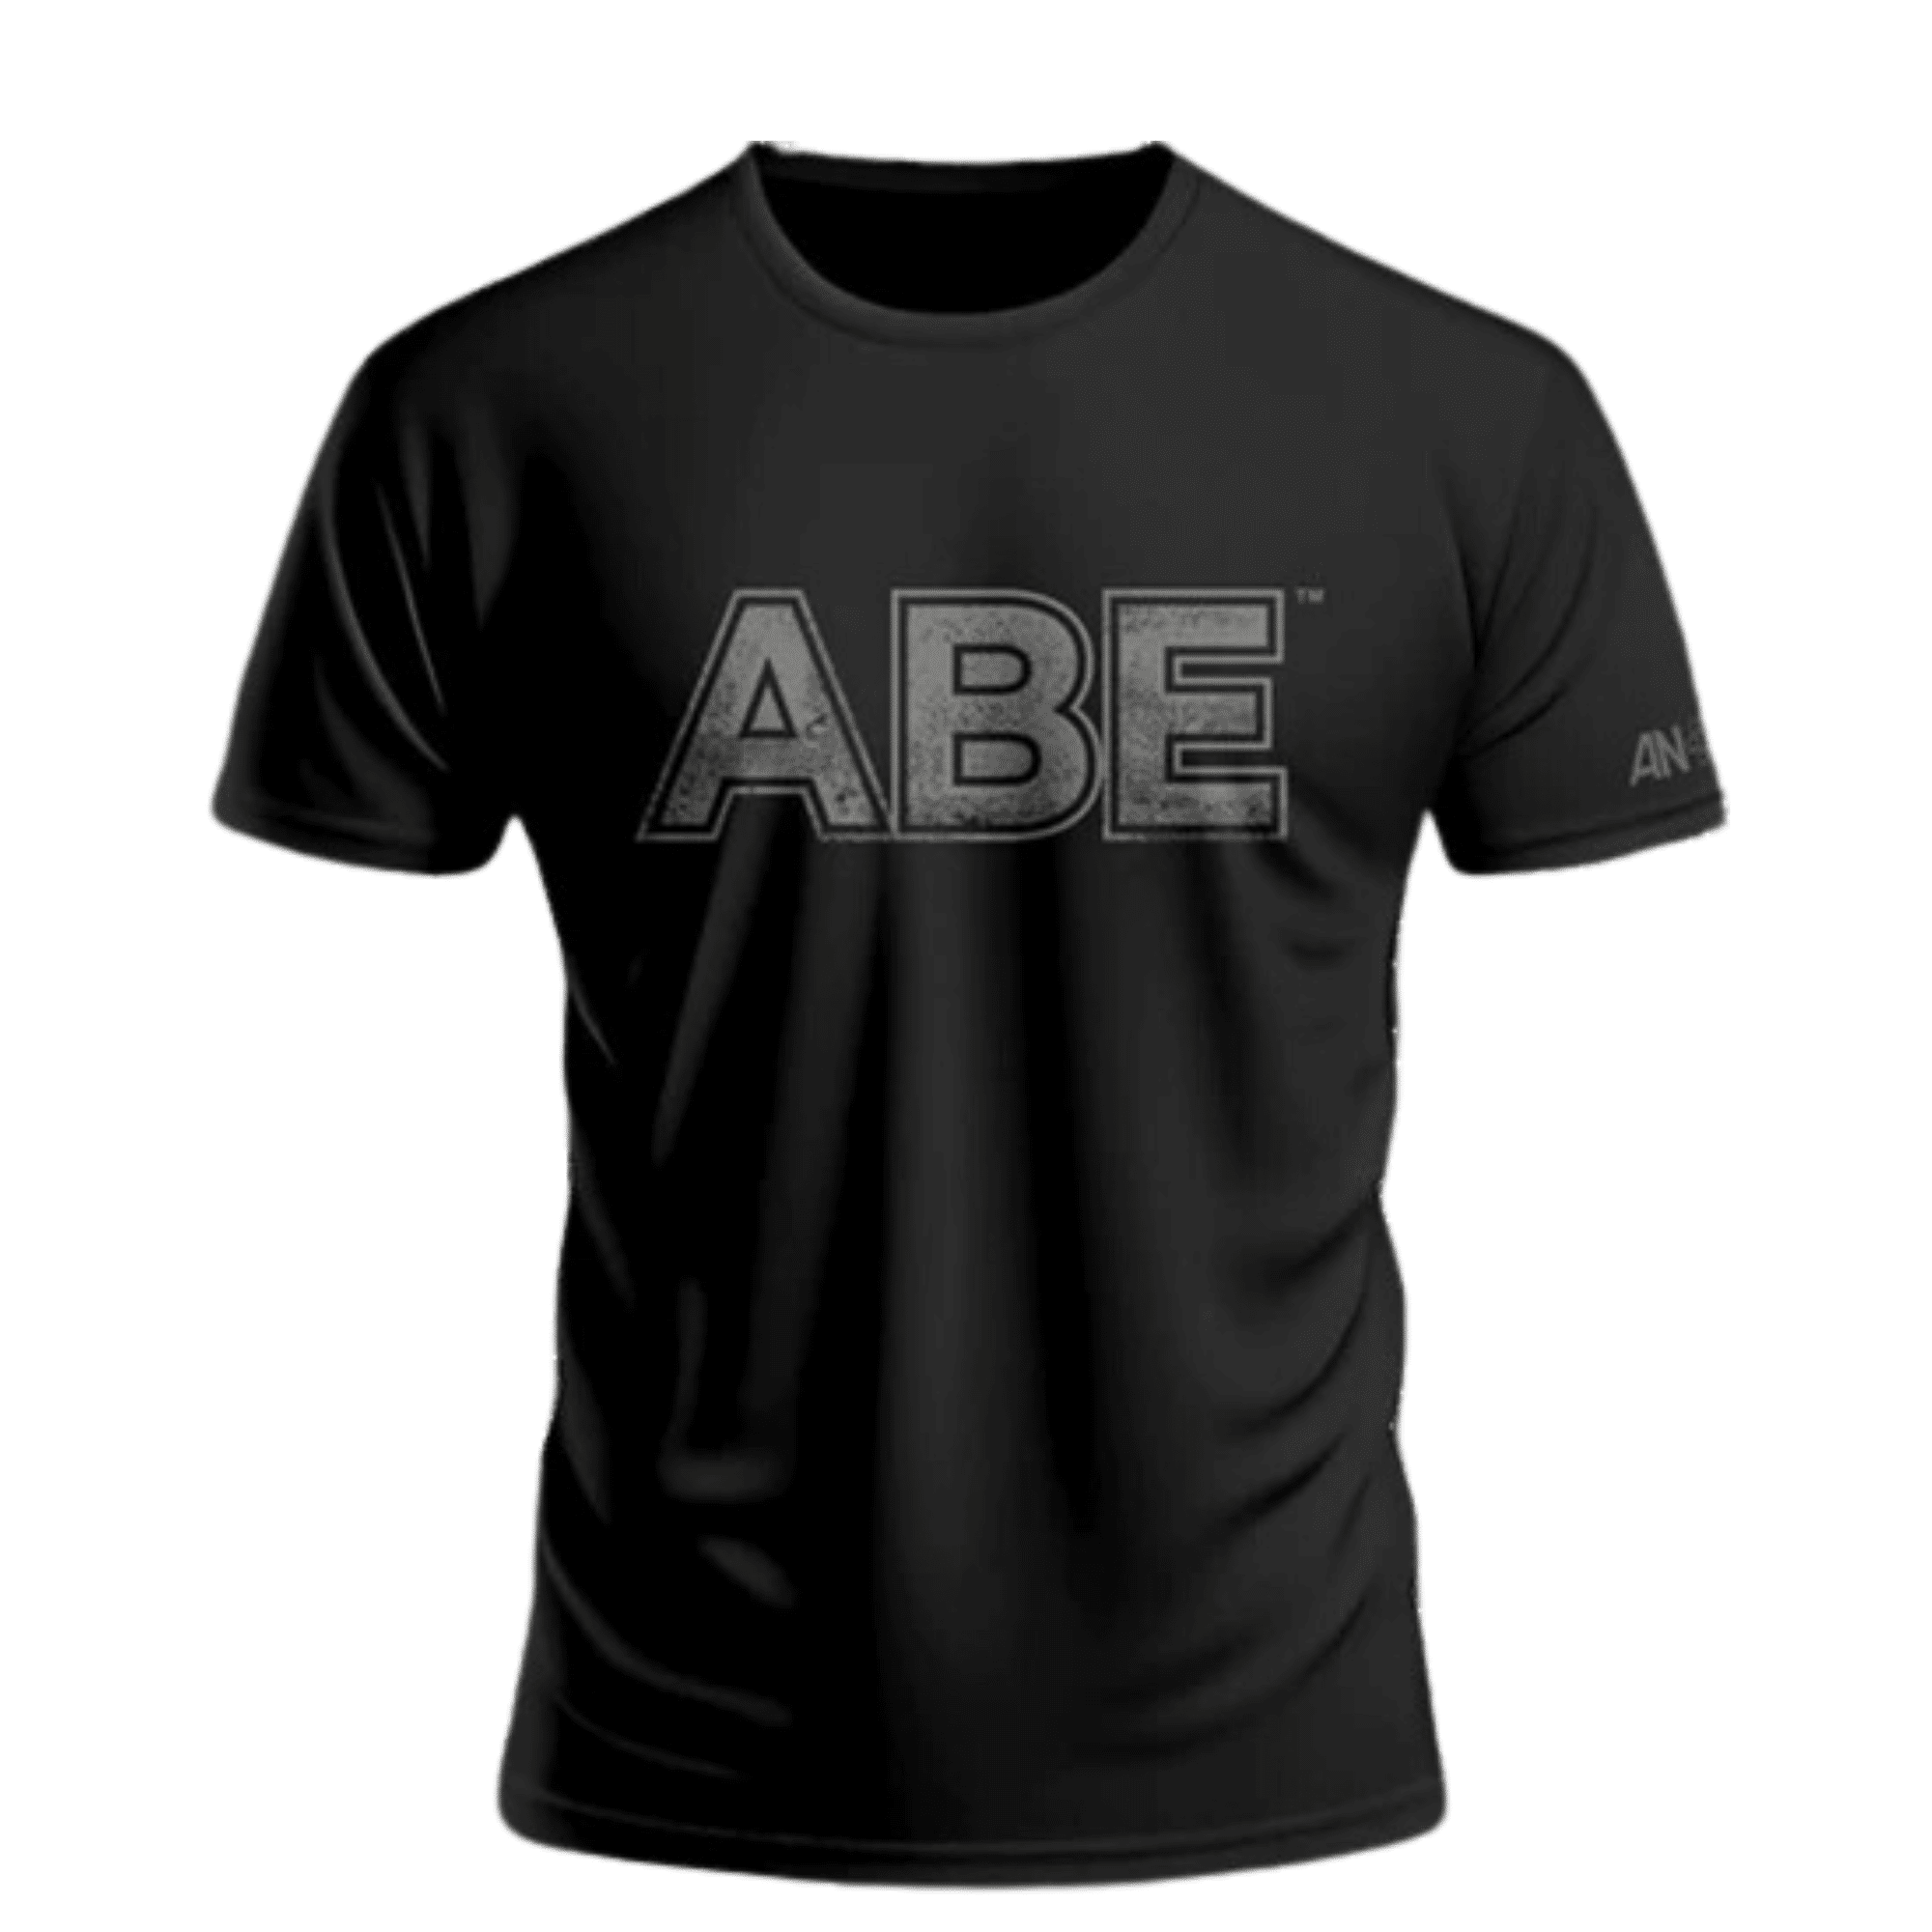 Applied Nutrition ABE T-Shirt Black